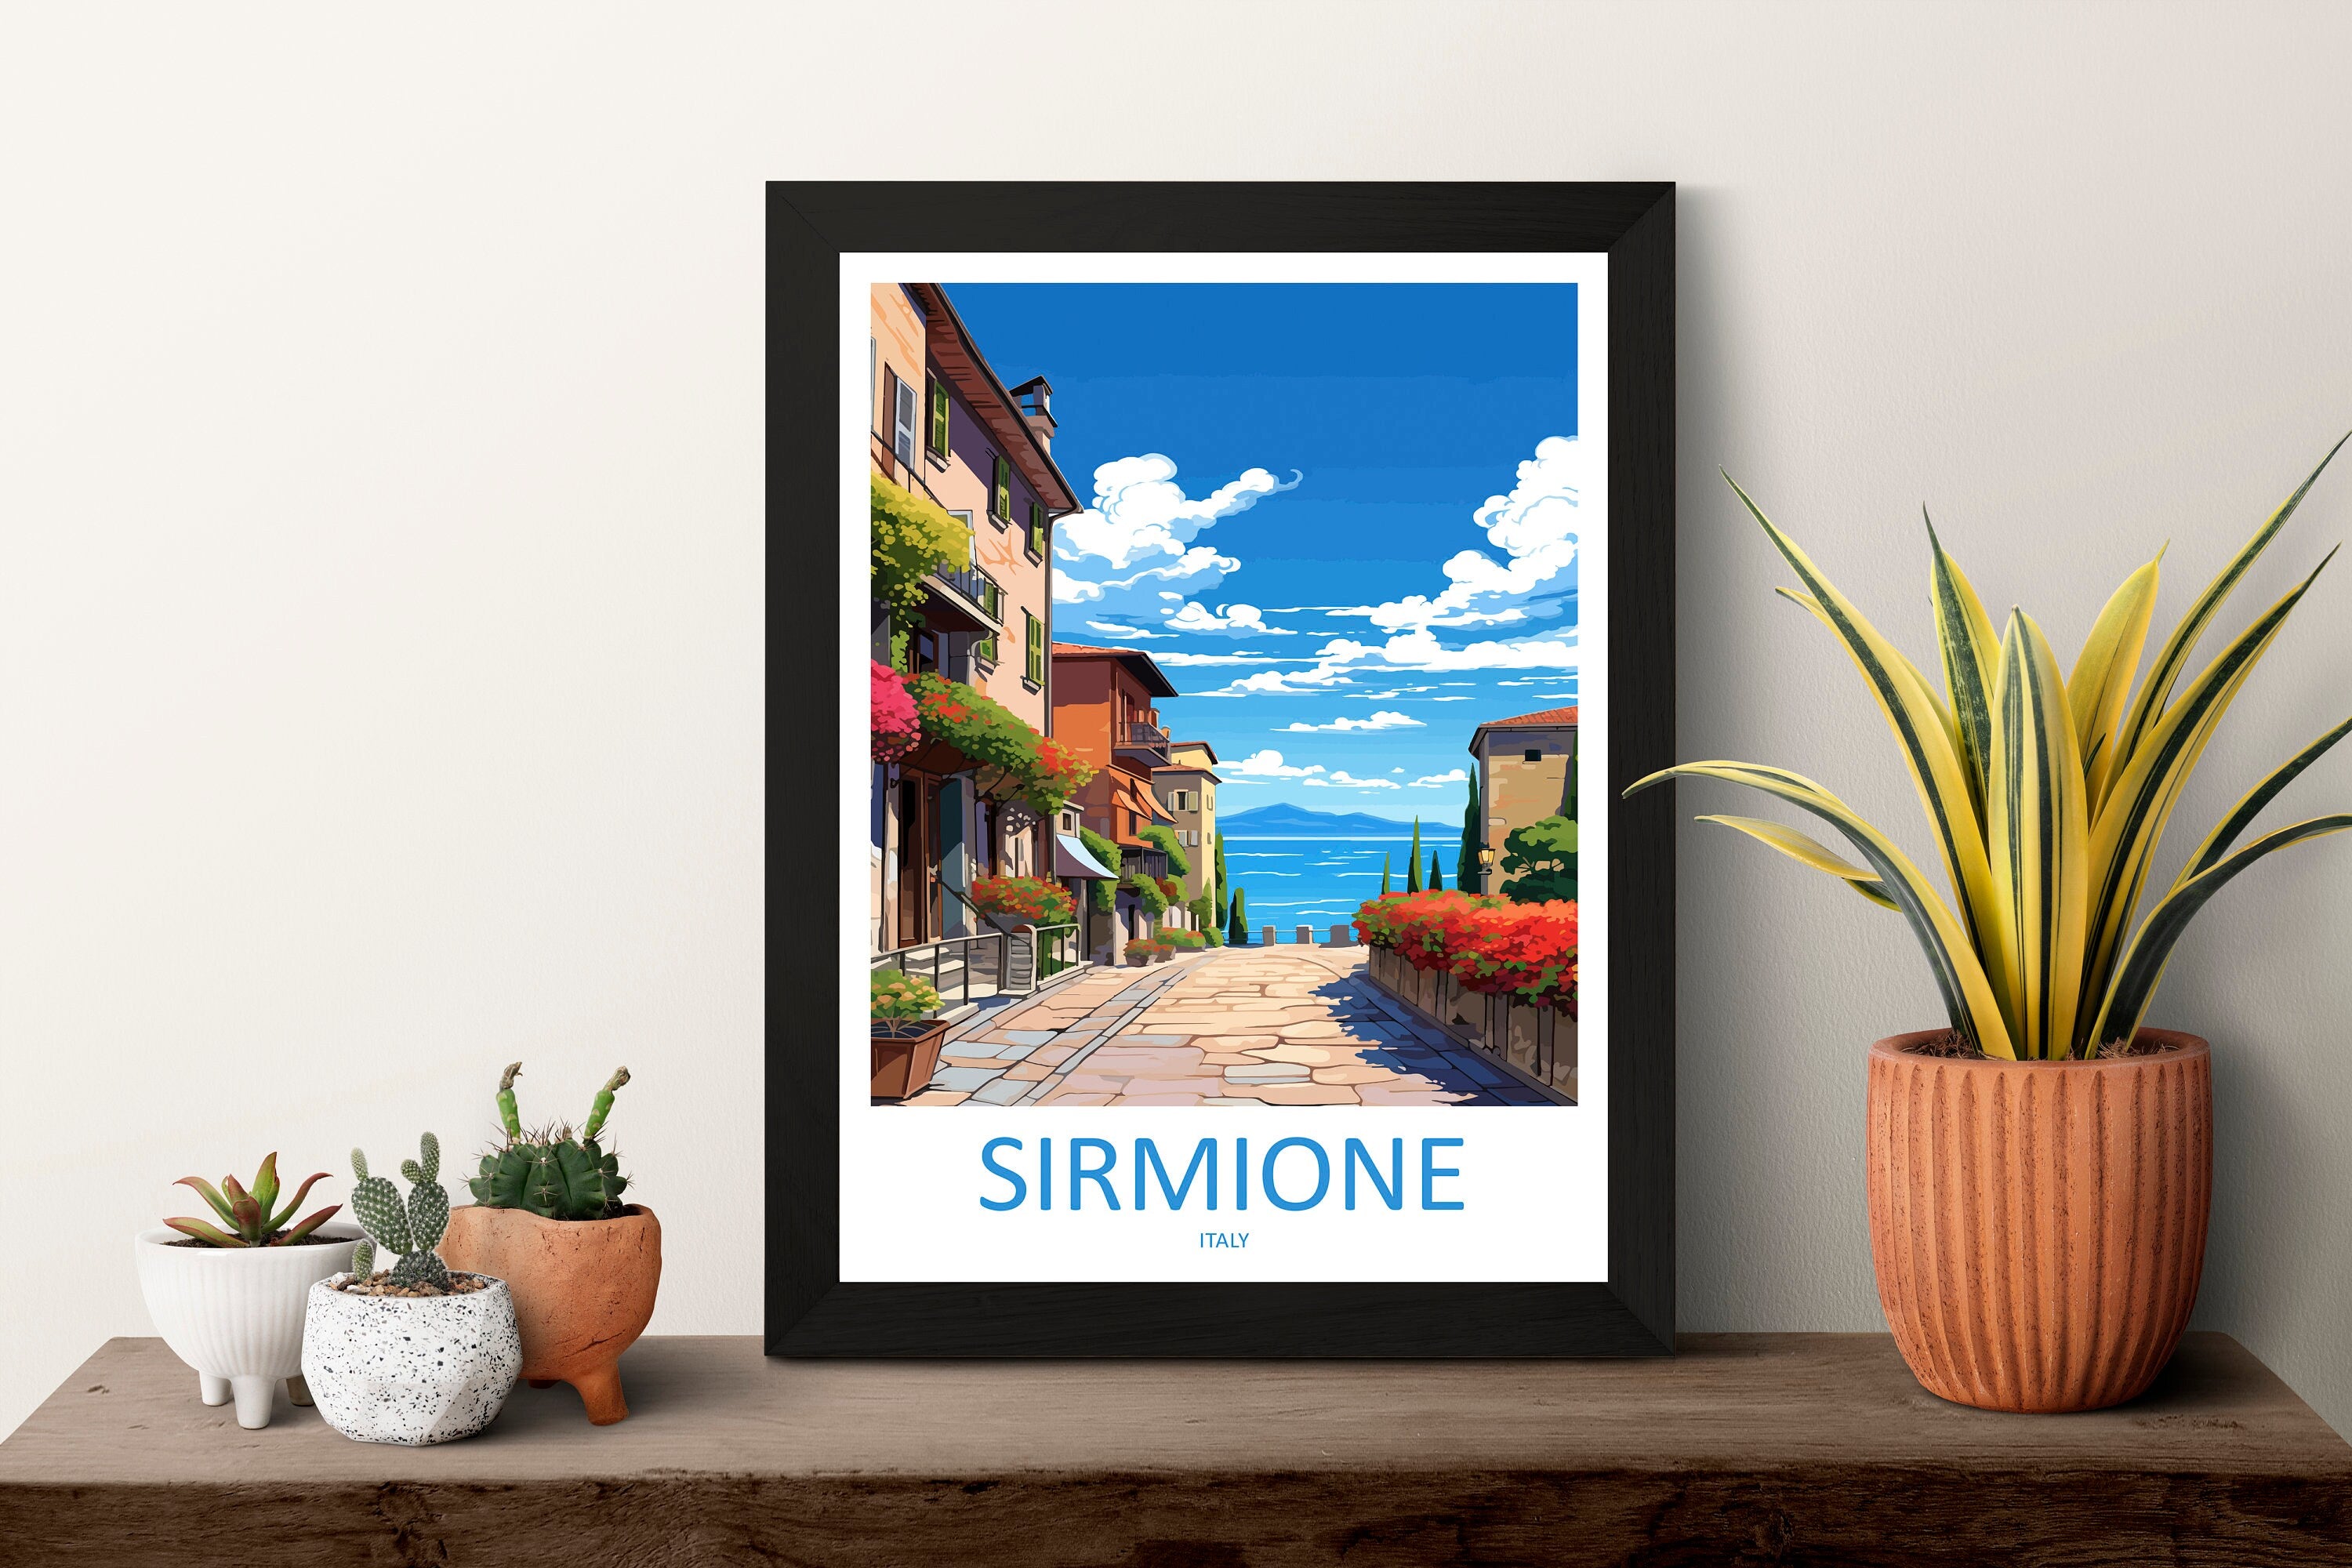 Sirmione Travel Print Wall Art Sirmione Italy Wall Hanging Home Decor Sirmione Gift Art Lovers Wall Art Print Sirmione Italy